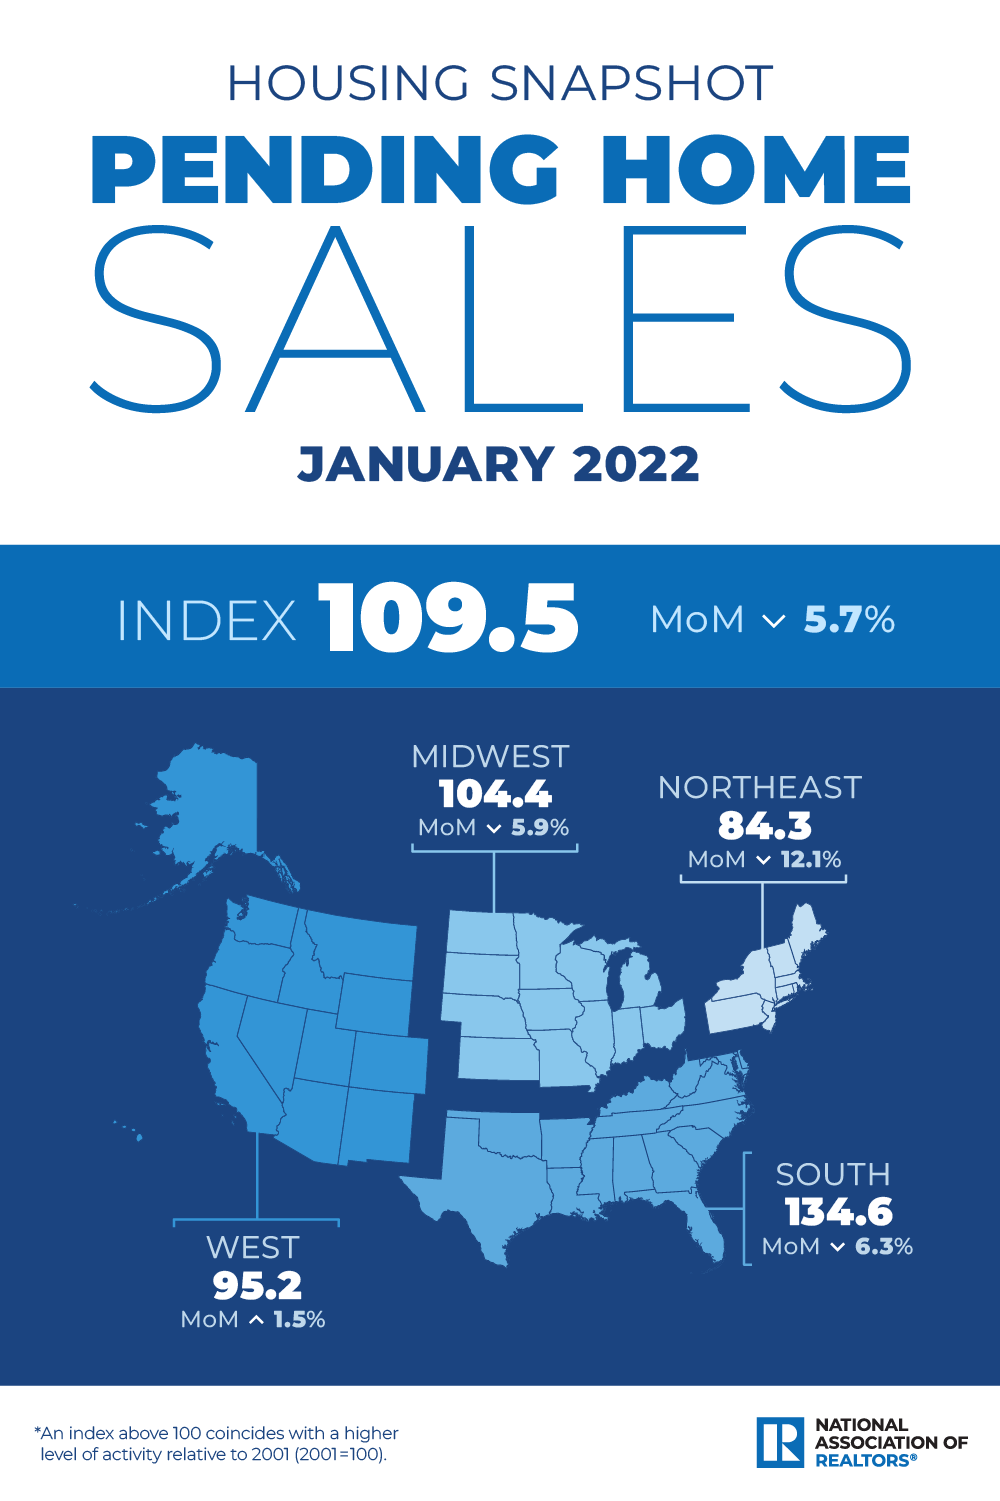 Comparing Regions Nationally:  Pending Sales INFOGRAPHIC